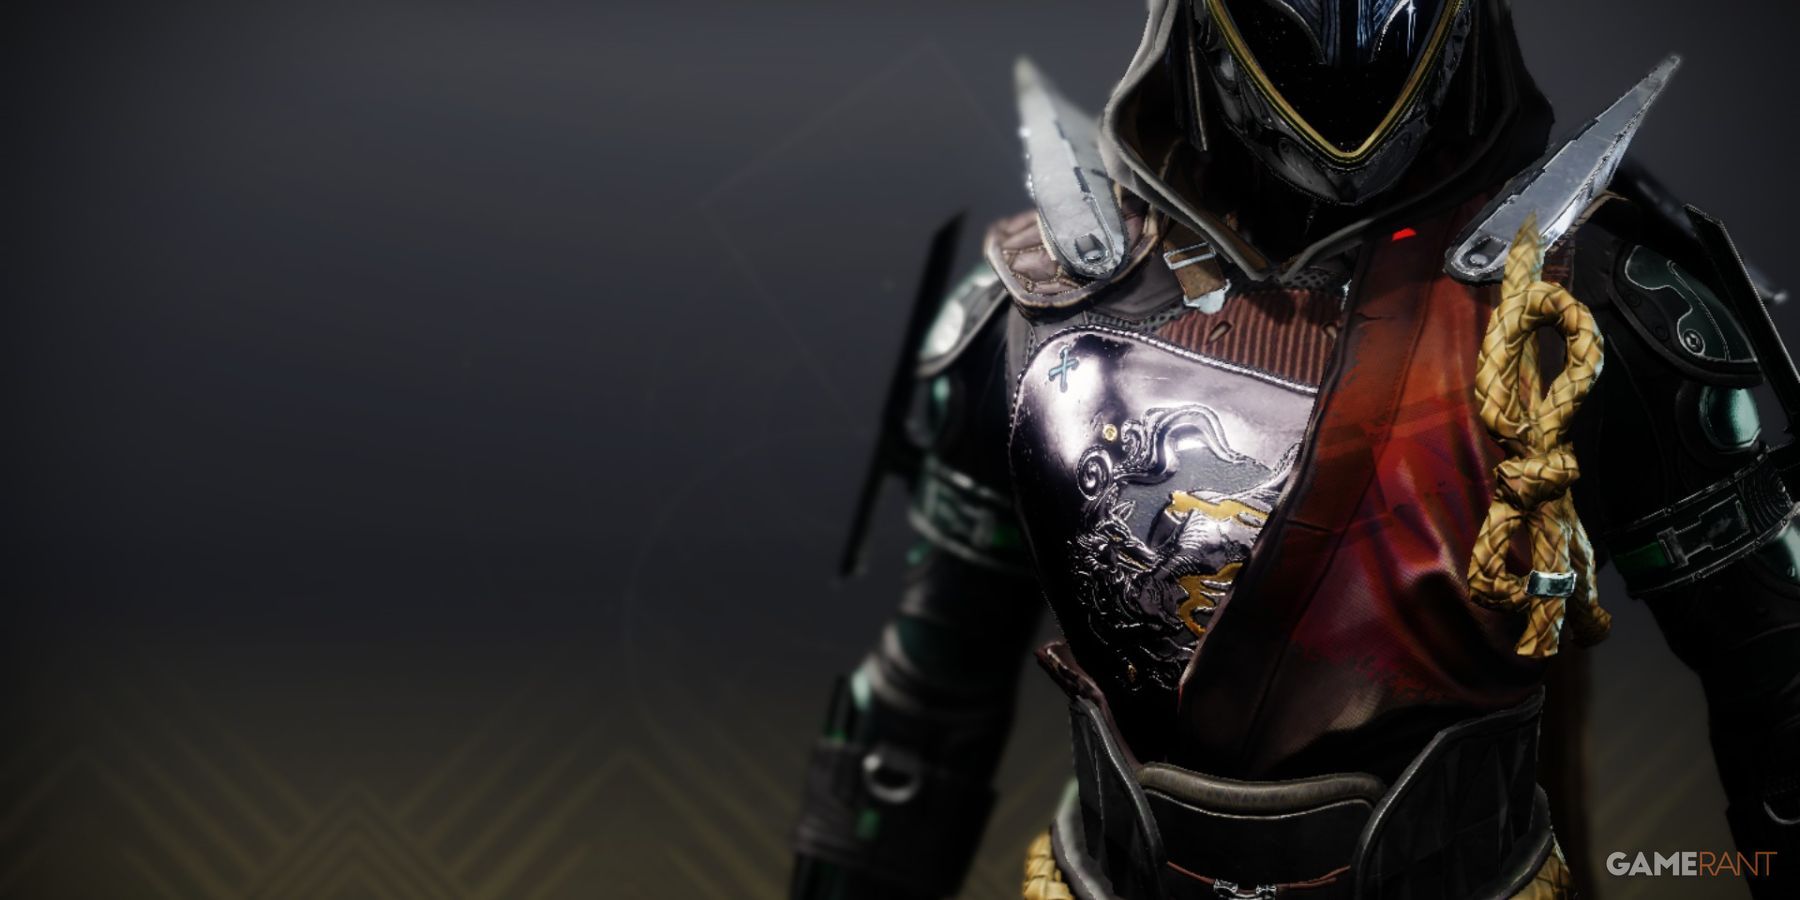 Destiny 2 Sixth Coyote Exotic Chest Piece For Hunters